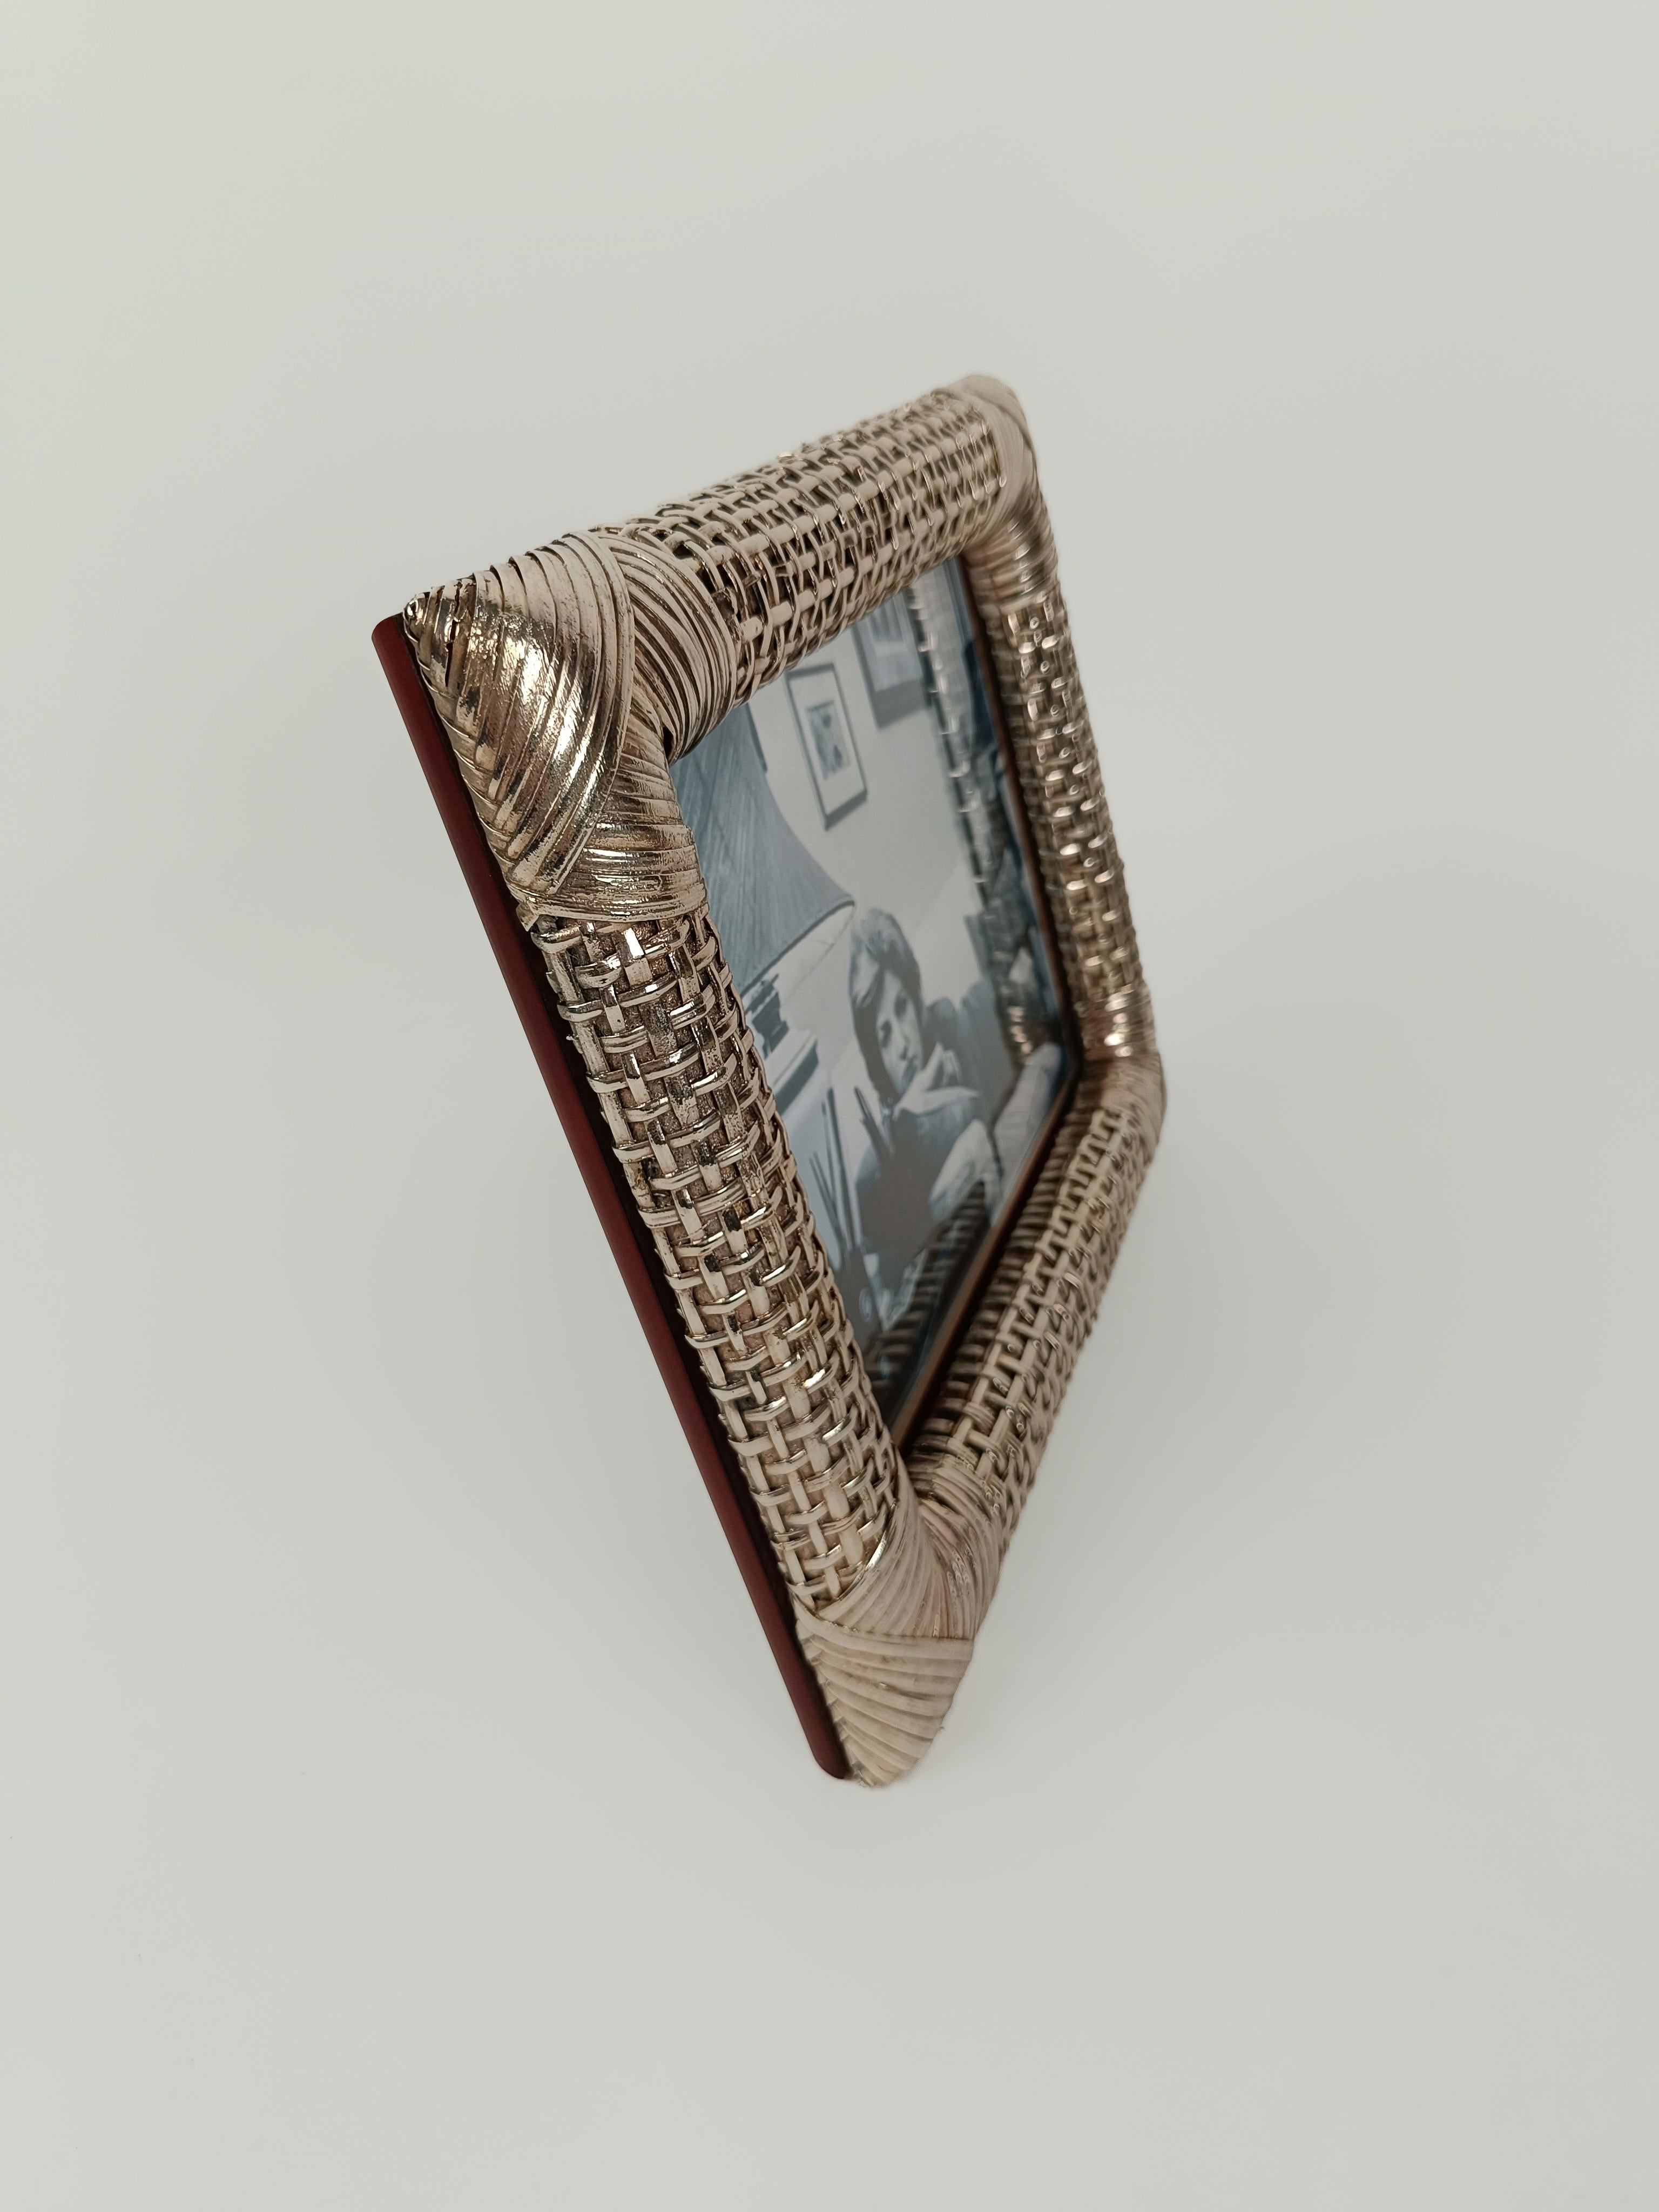 Midcentury Table Picture Frame Made in Silver Plated Woven Wicker, Italy 1970s For Sale 10